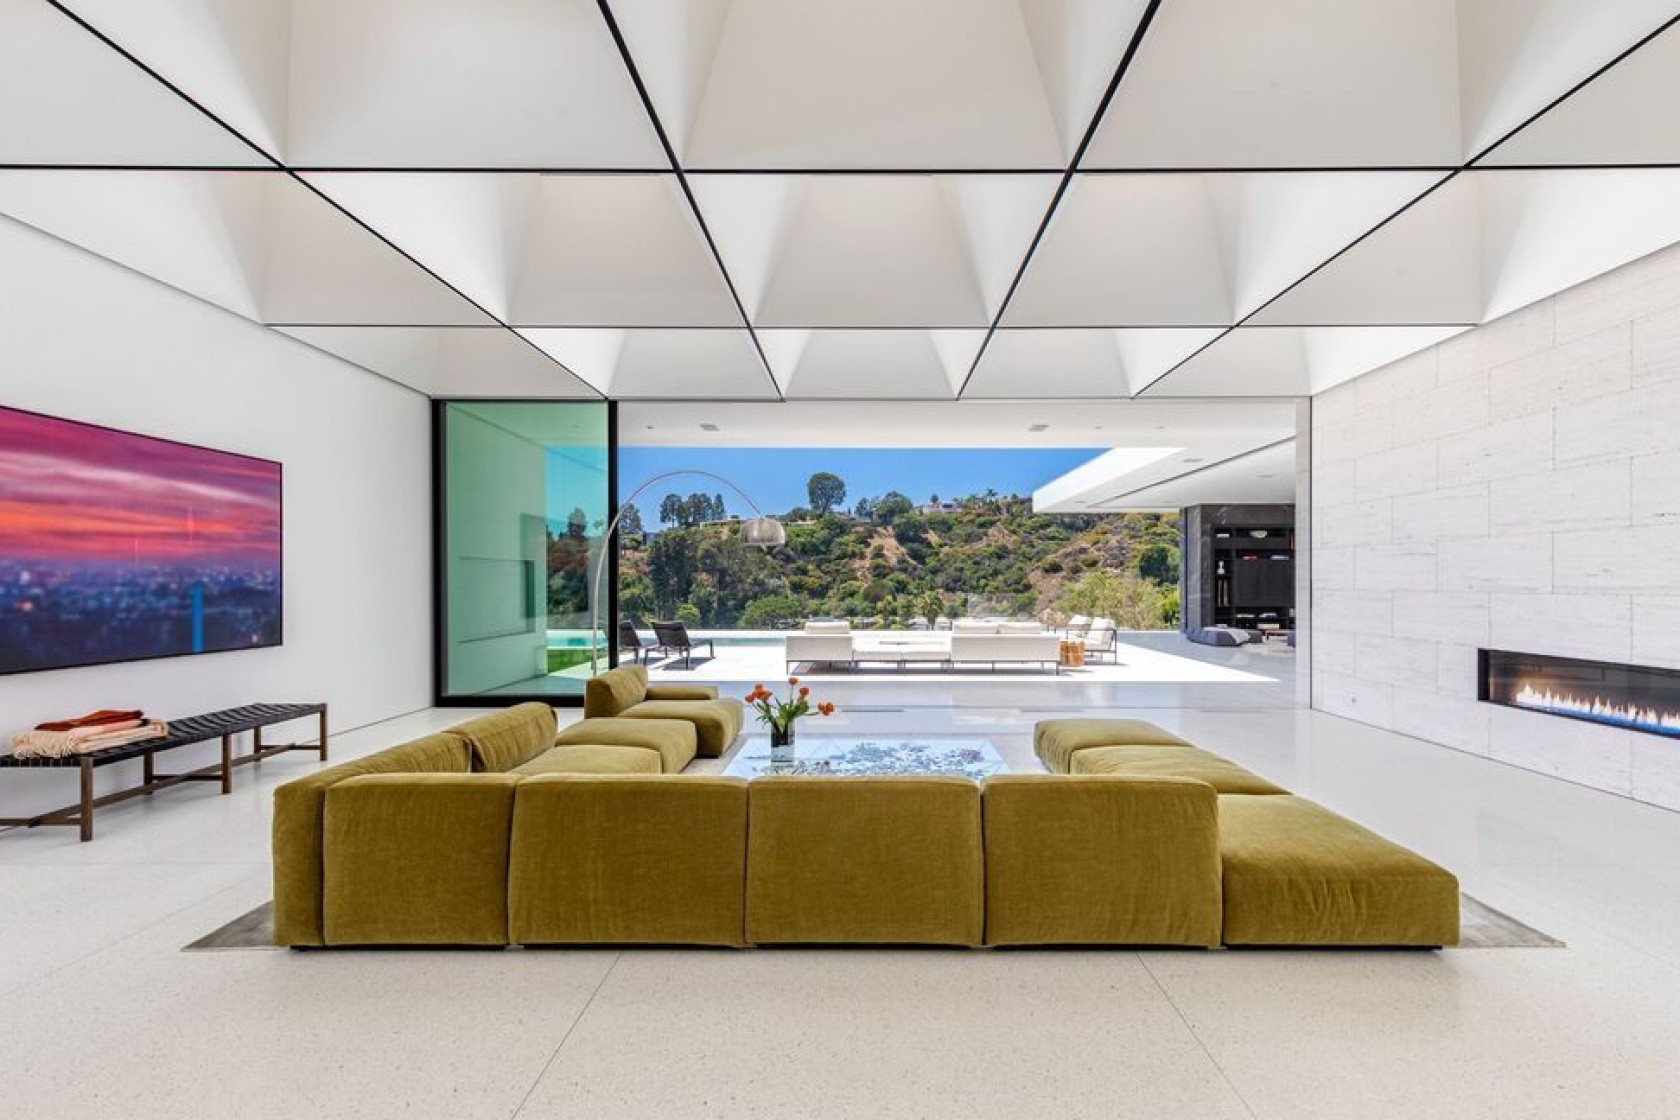 The ceilings in Casey Wasserman's new house cost $1 million alone, it has been reported ©Realtor.com